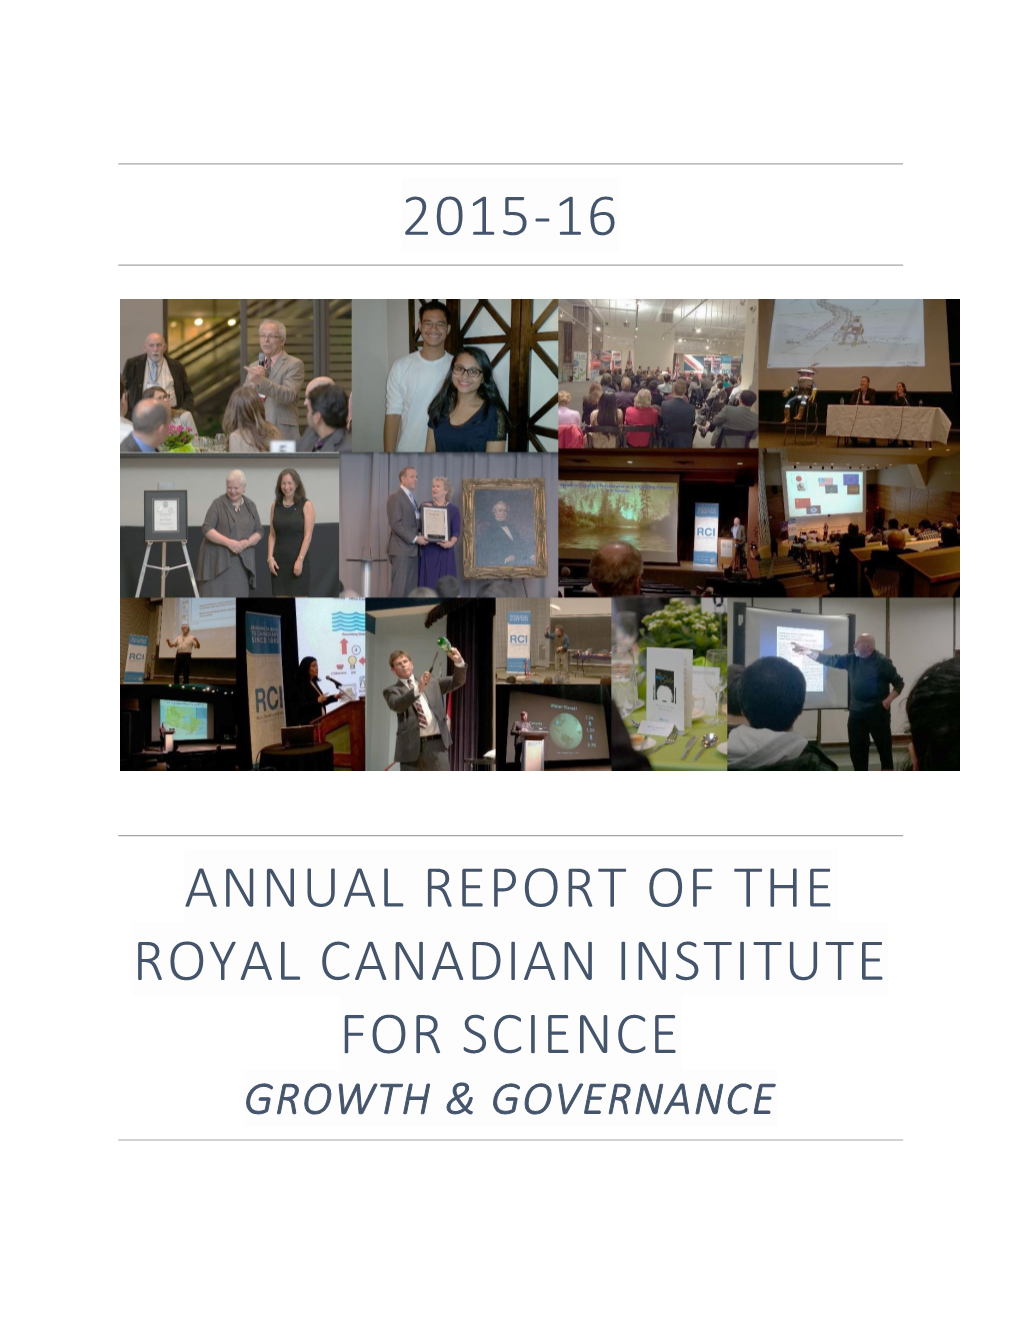 2015-16 Annual Report of the Royal Canadian Institute